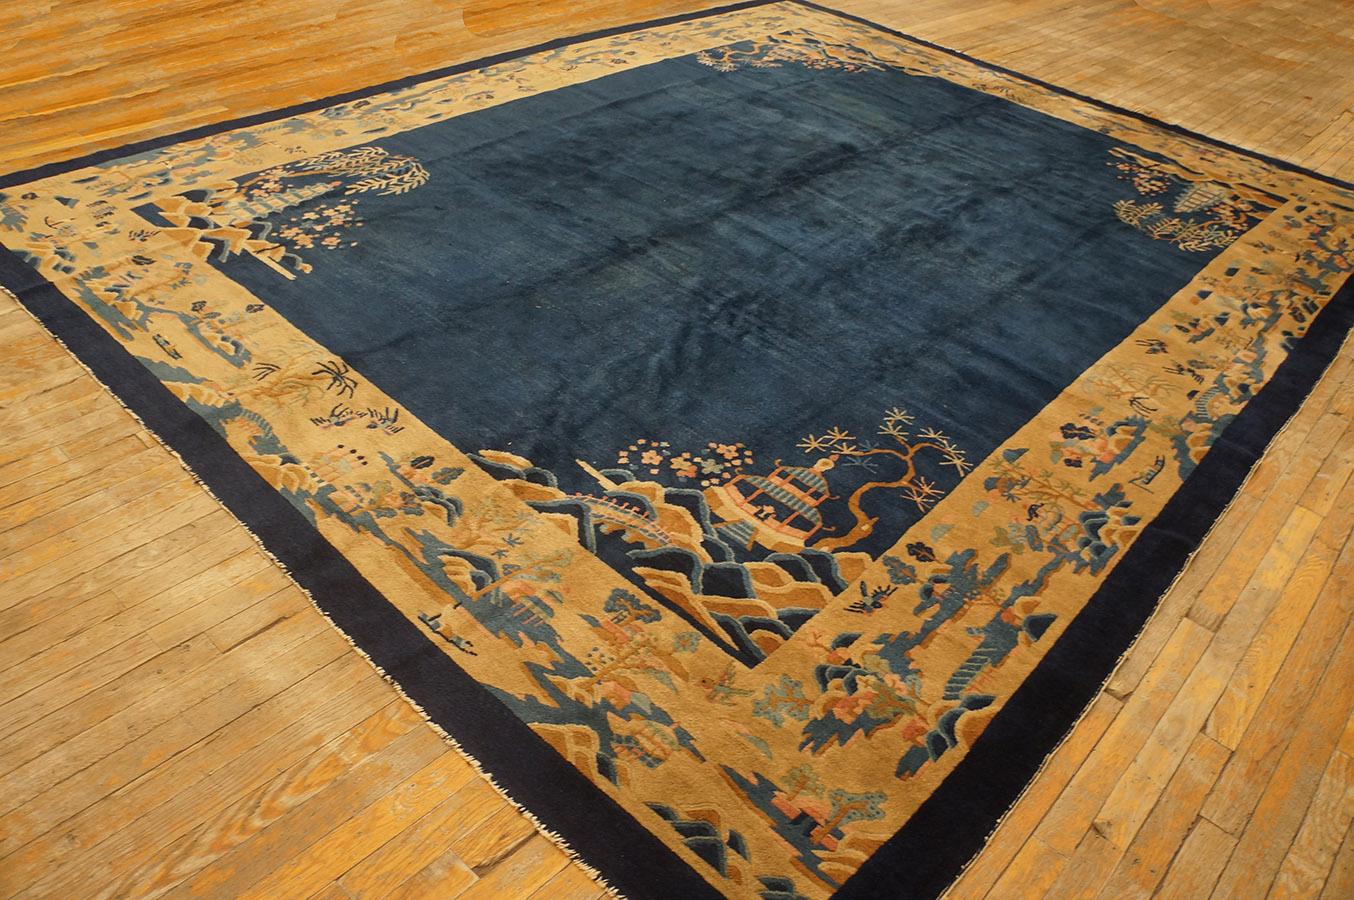 Early 20th Century Chinese Peking Carpet ( 9'2'' x 11'6'' - 280 x 350 ) In Good Condition For Sale In New York, NY